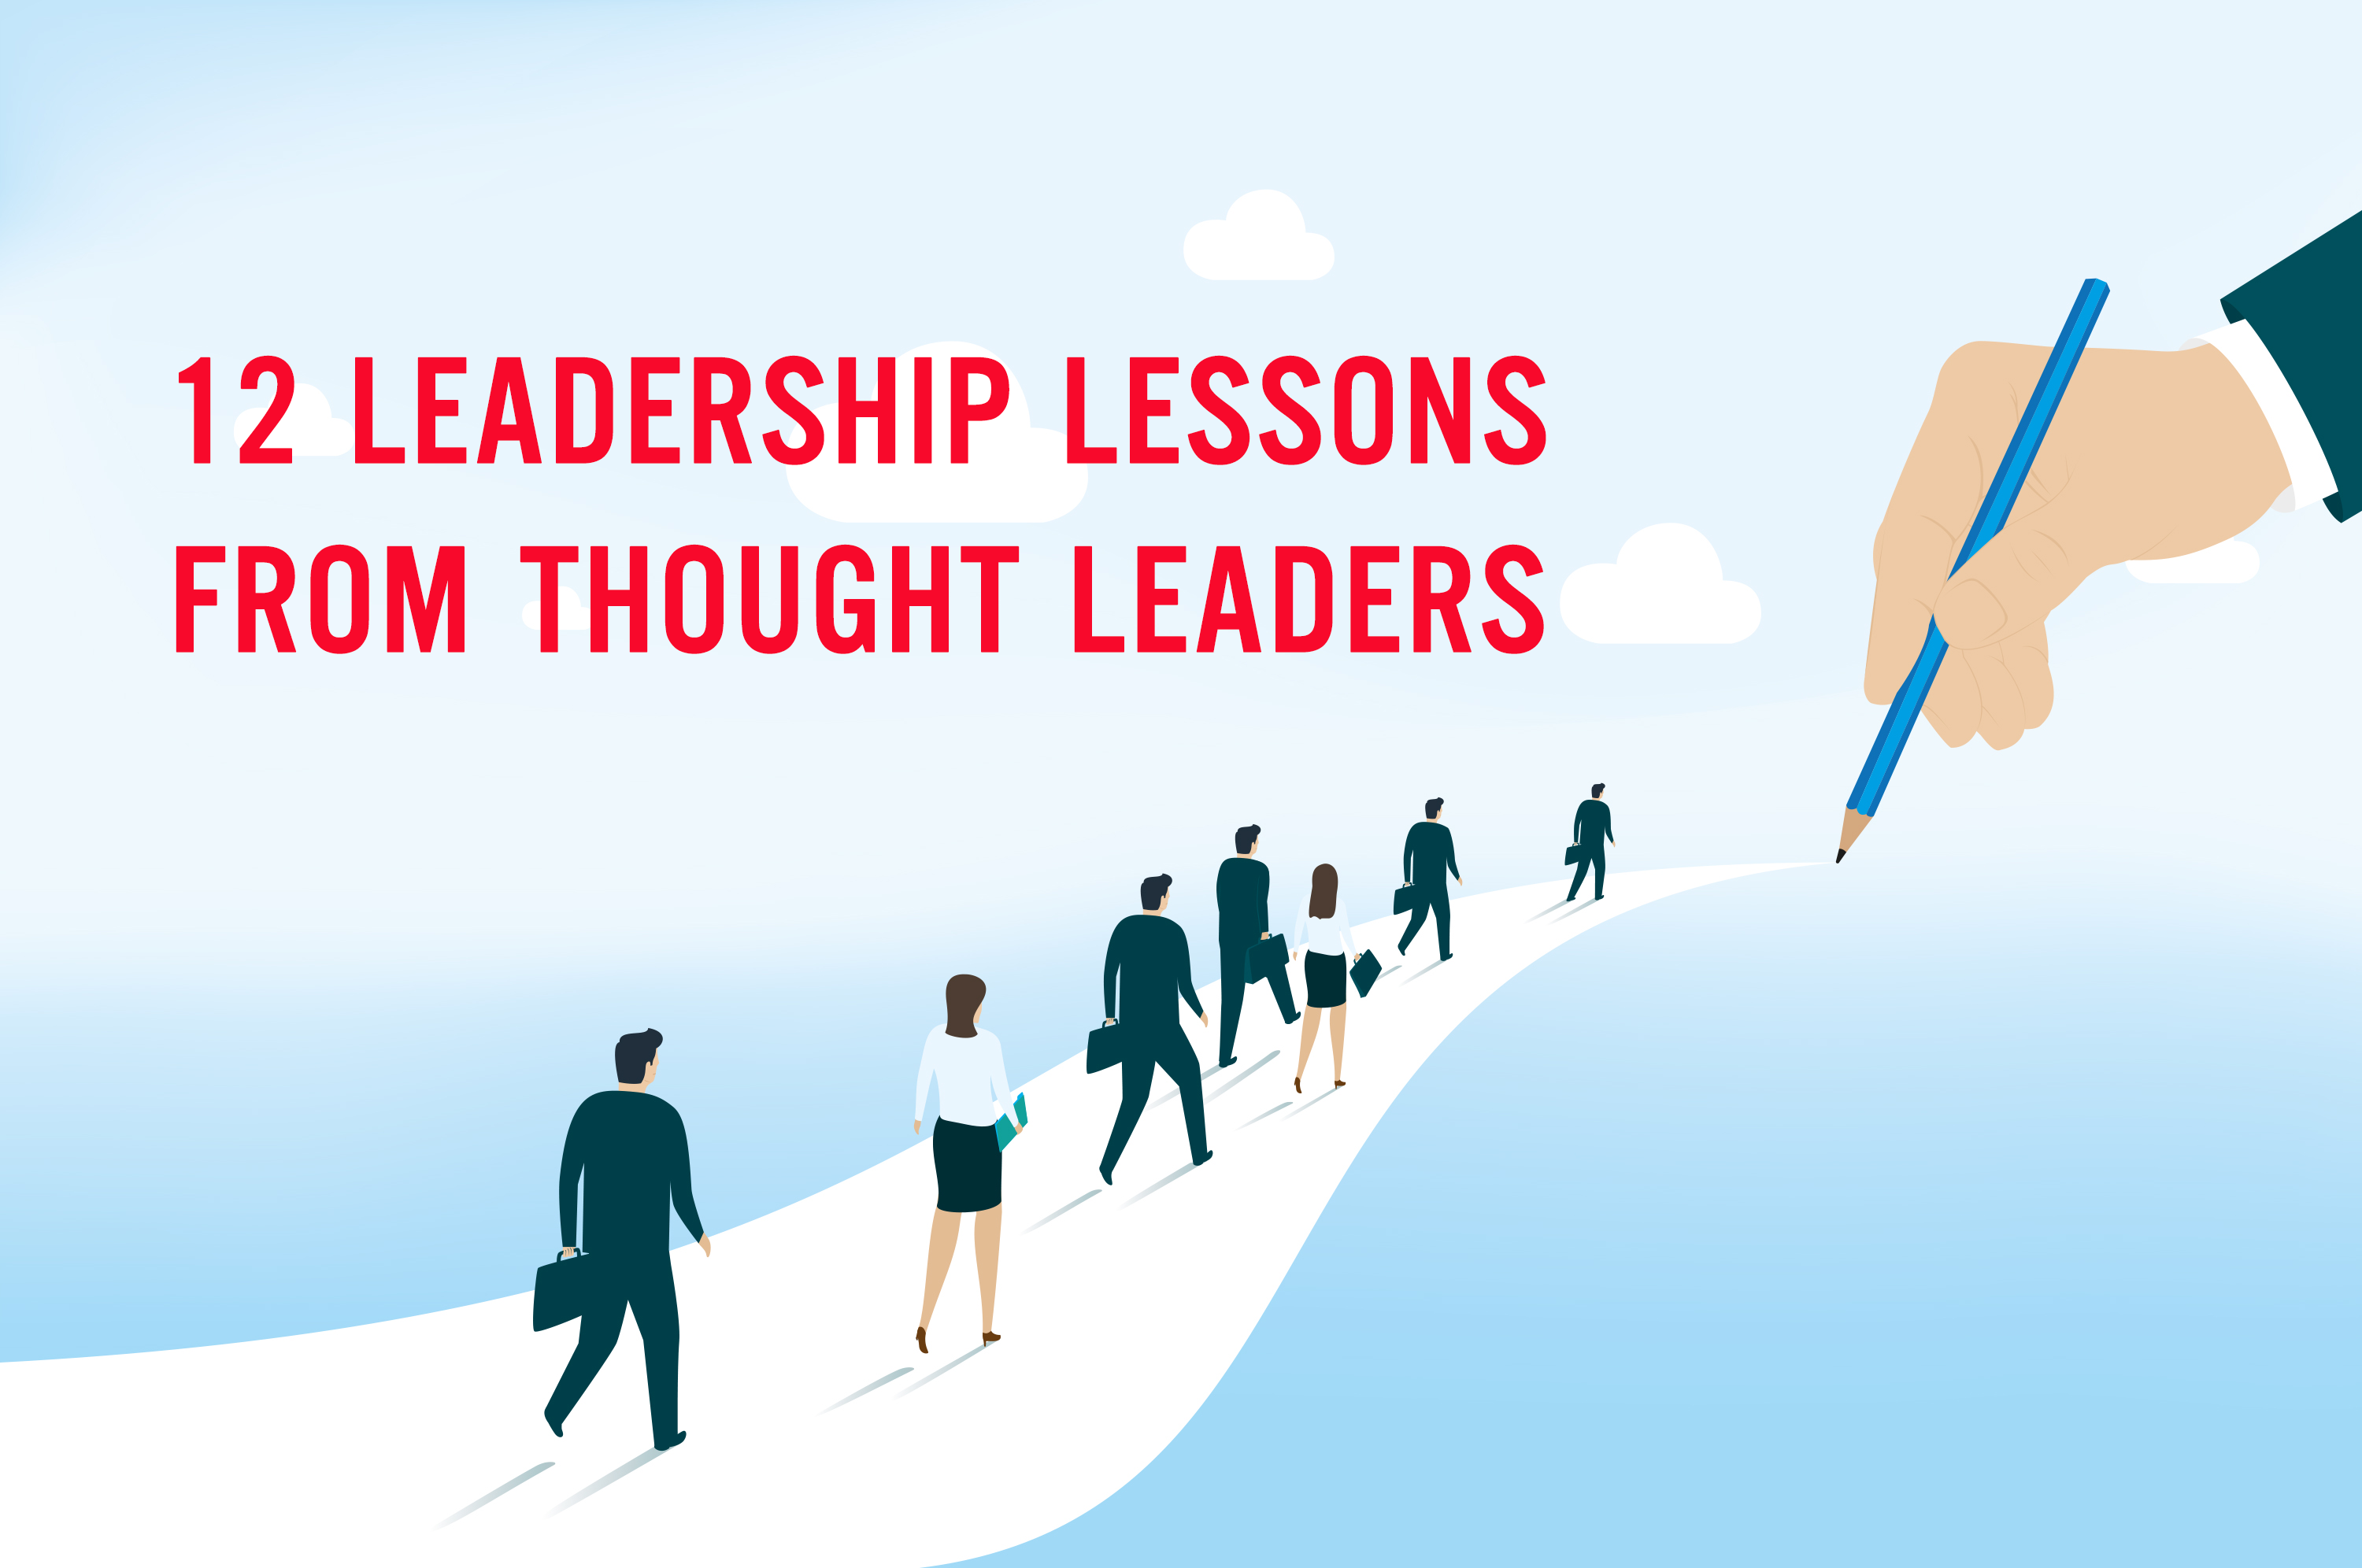 12 Leadership Lessons from Thought Leaders